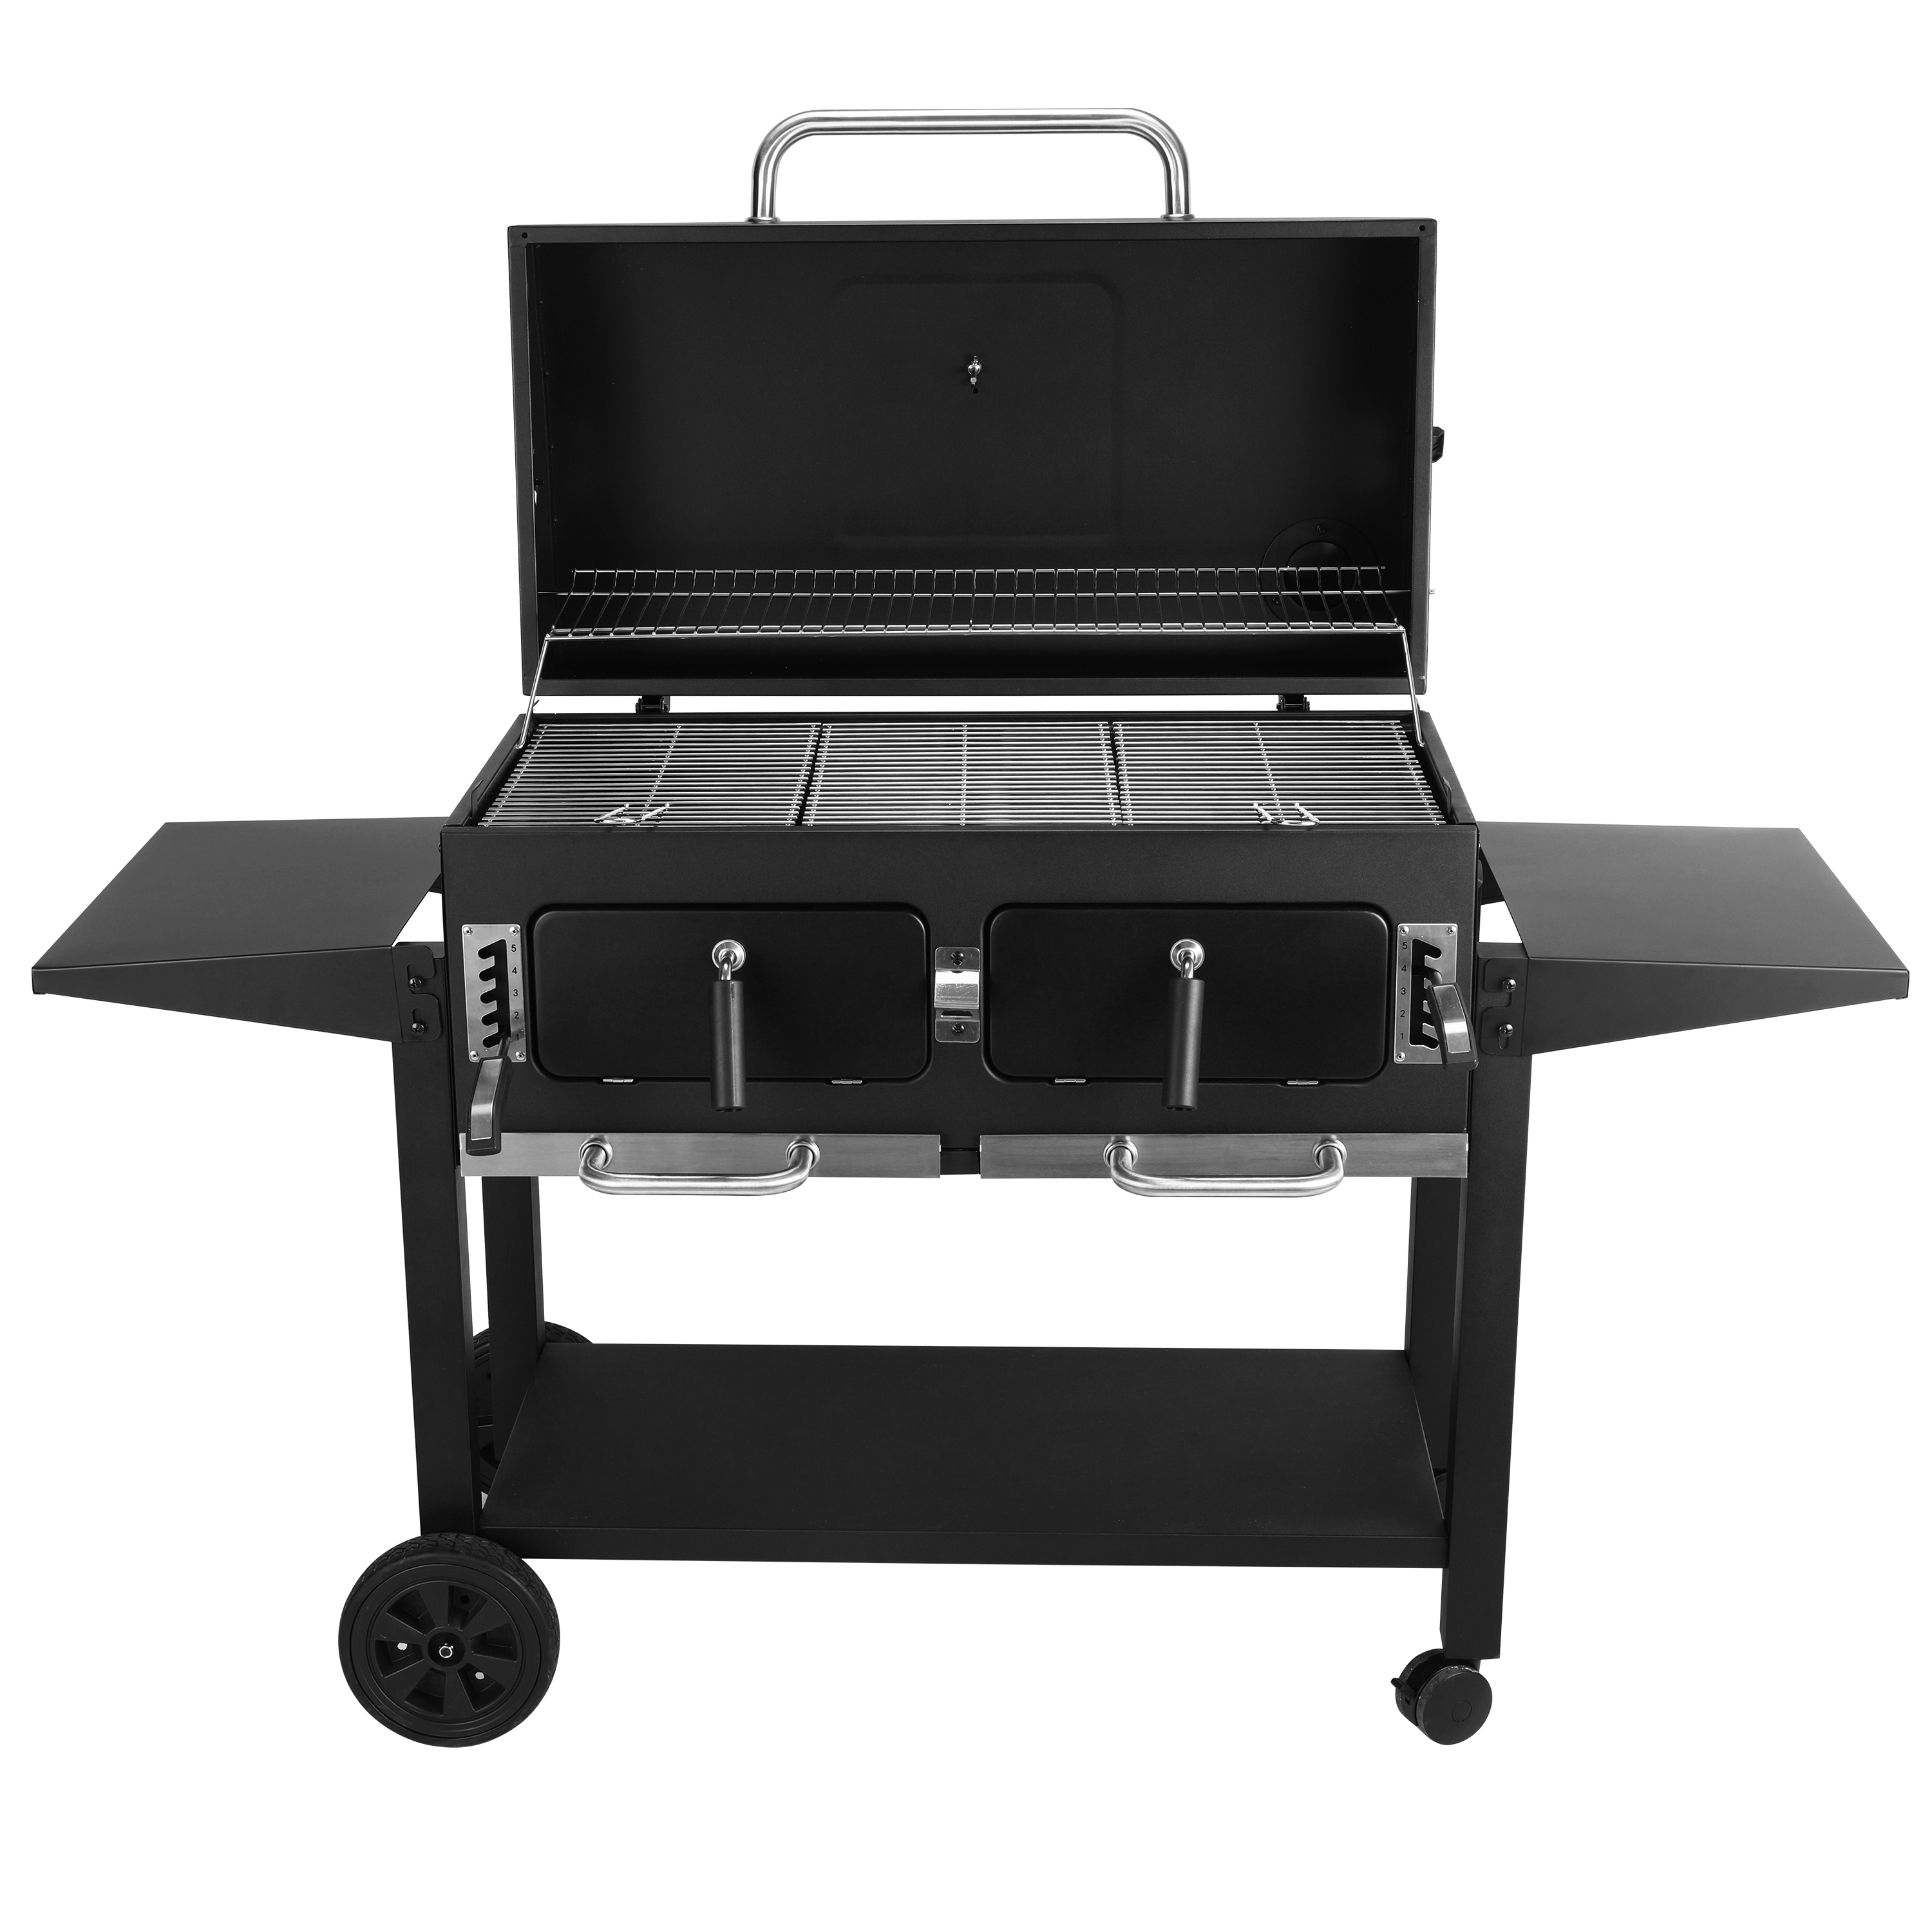 KING SIZE CHARCOAL BARBECUE With 2 independent burners - best price from Maltashopper.com BR500013558